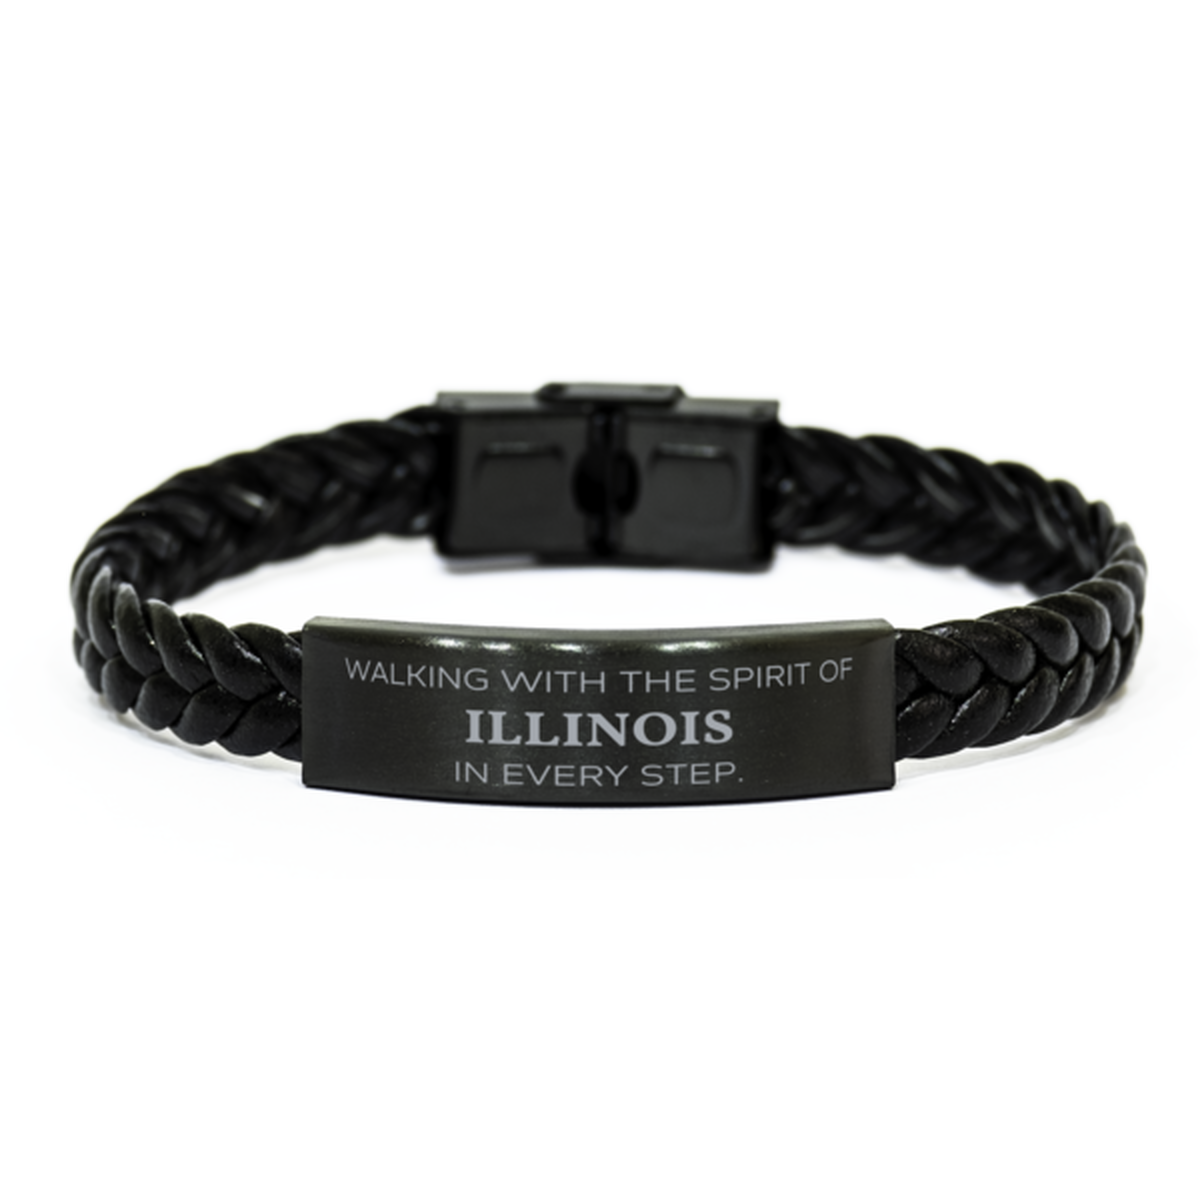 Illinois Gifts, Walking with the spirit, Love Illinois Birthday Christmas Braided Leather Bracelet For Illinois People, Men, Women, Friends